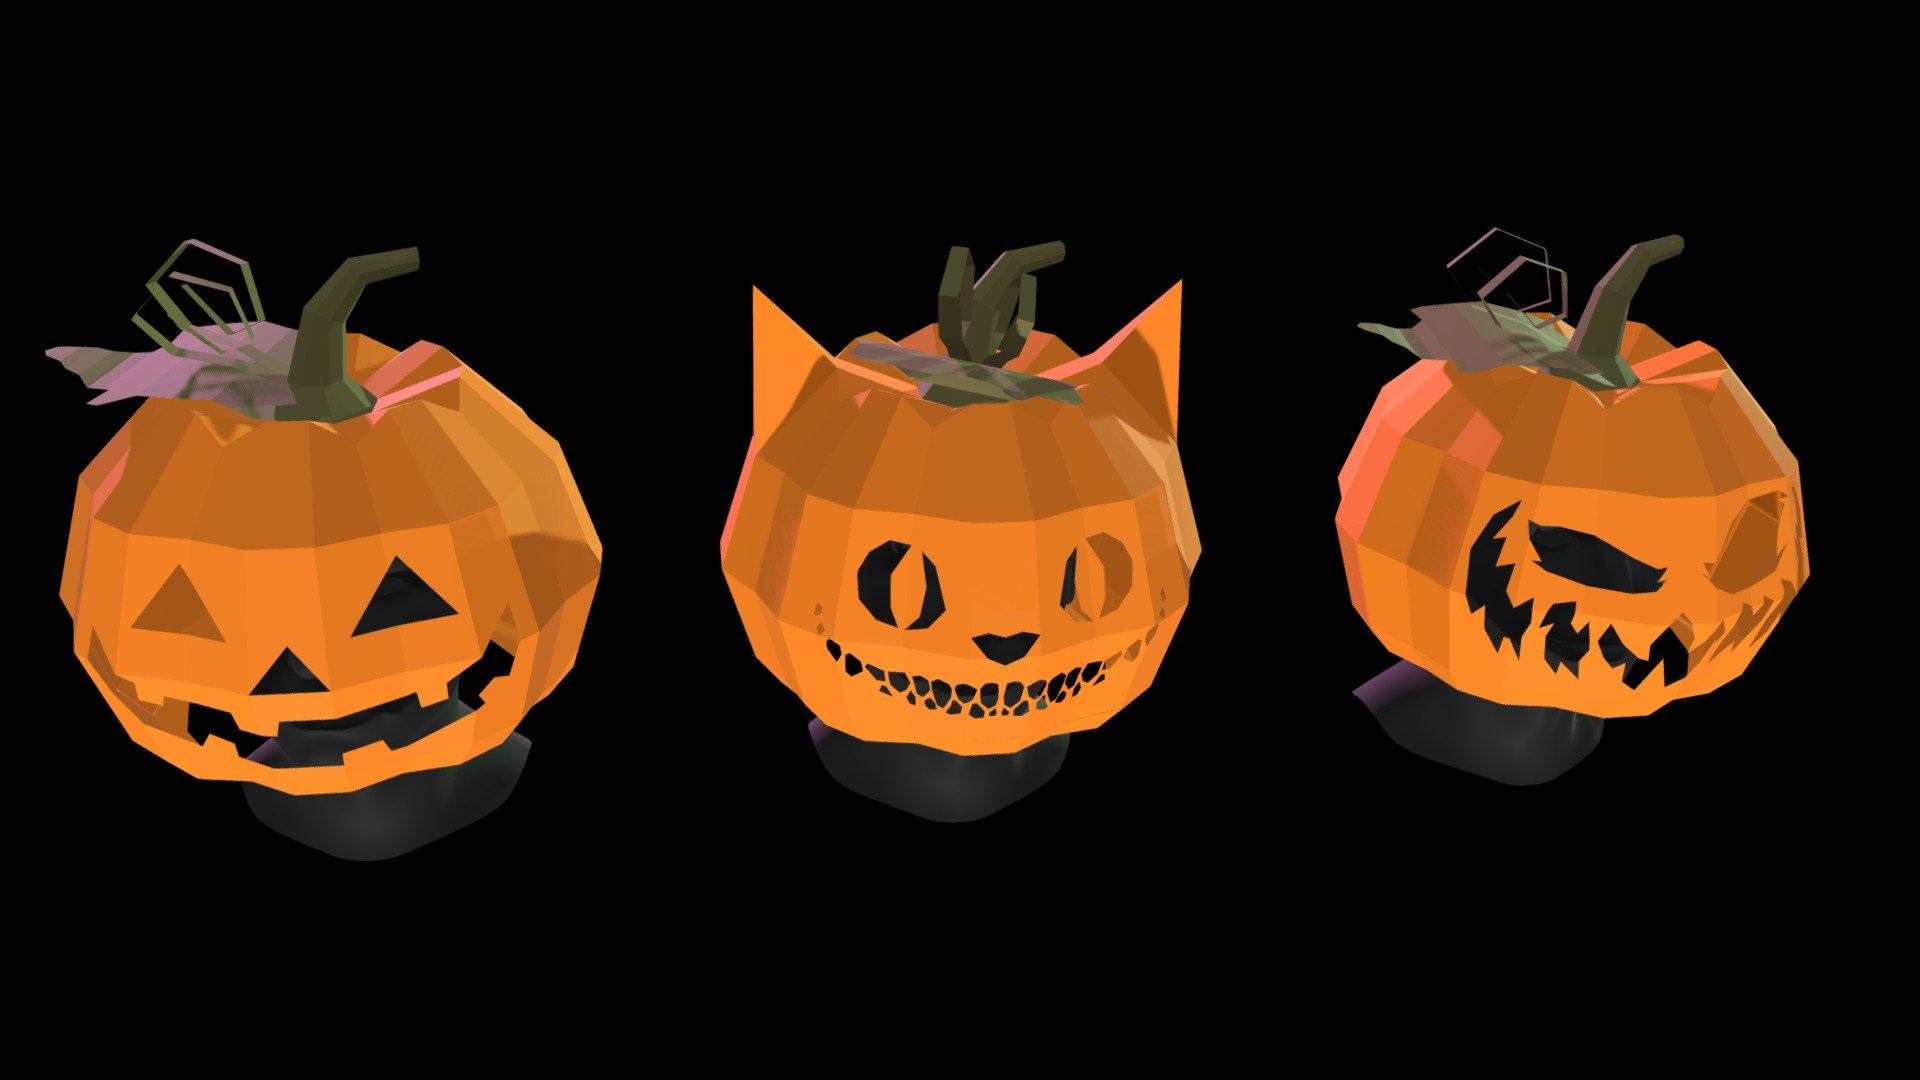 Models are designed for low poly paper craft - Pumpkin Heads - Buy Royalty Free 3D model by borisklimov 3d model